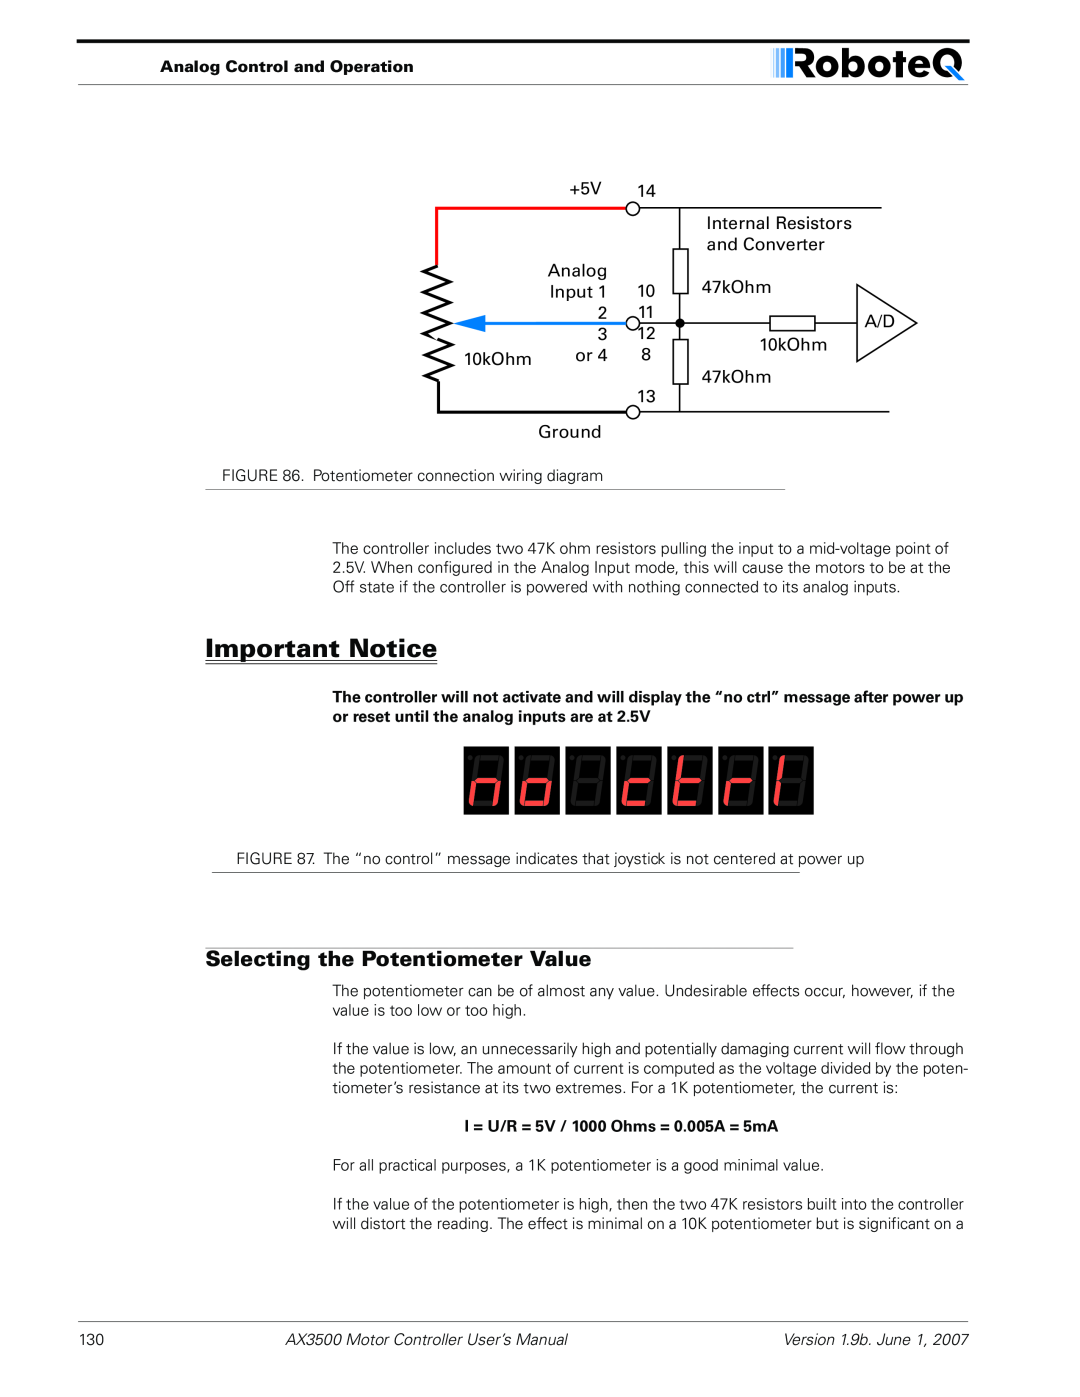 RoboteQ AX3500 user manual Selecting the Potentiometer Value, Important Notice 